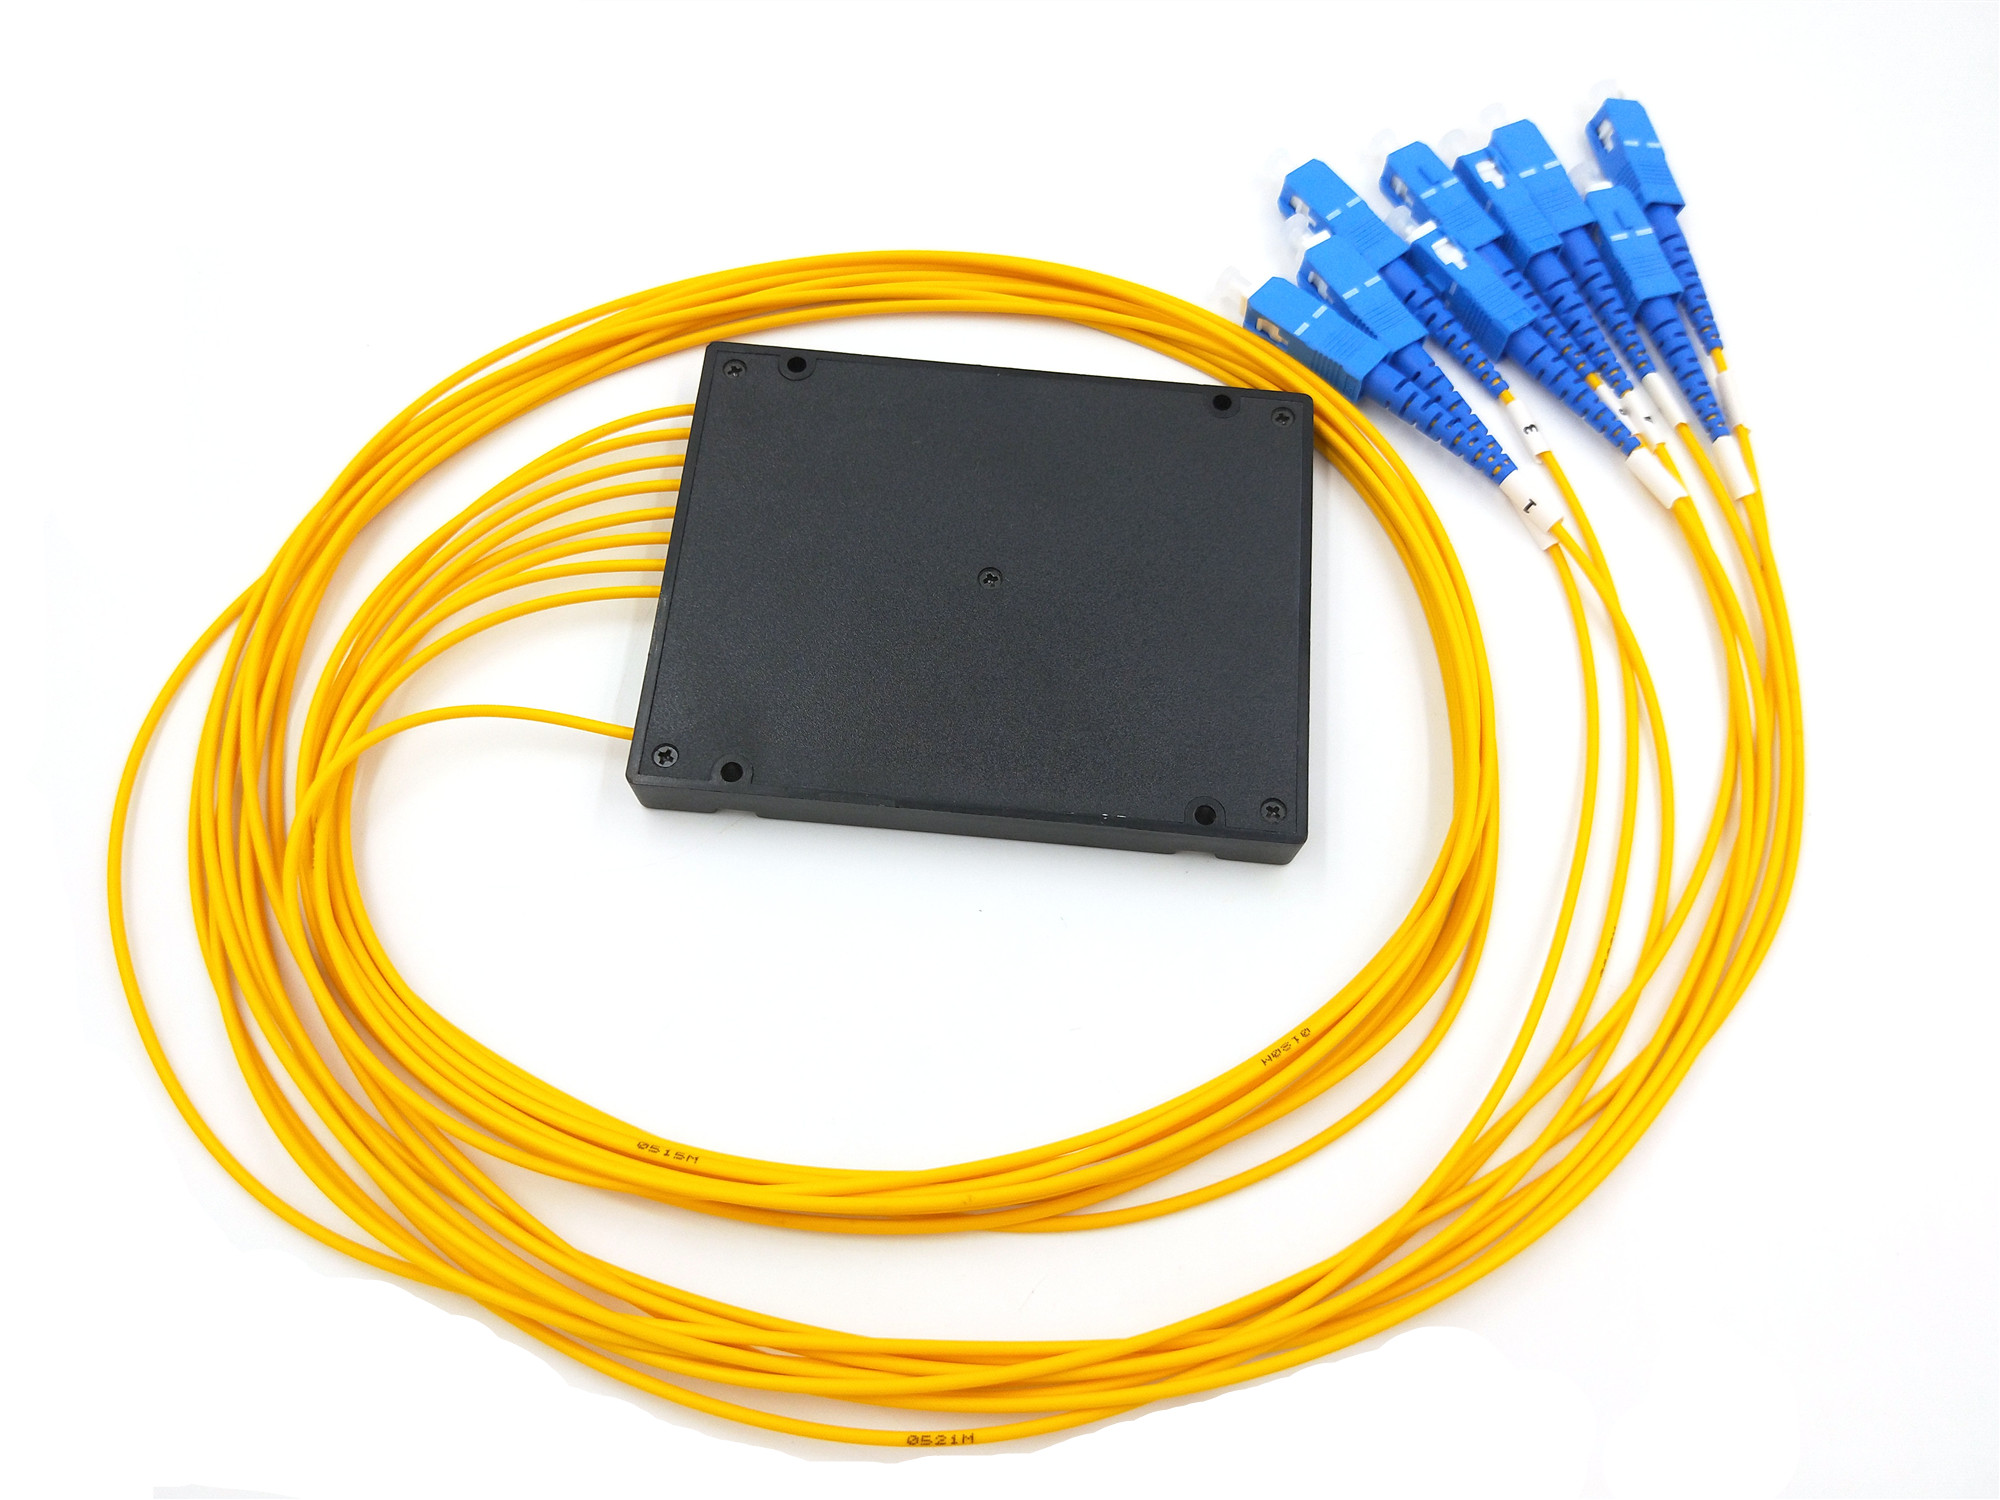 1×8 Fiber PLC Spitter ABS black box type with SC UPC Connector Featured Image